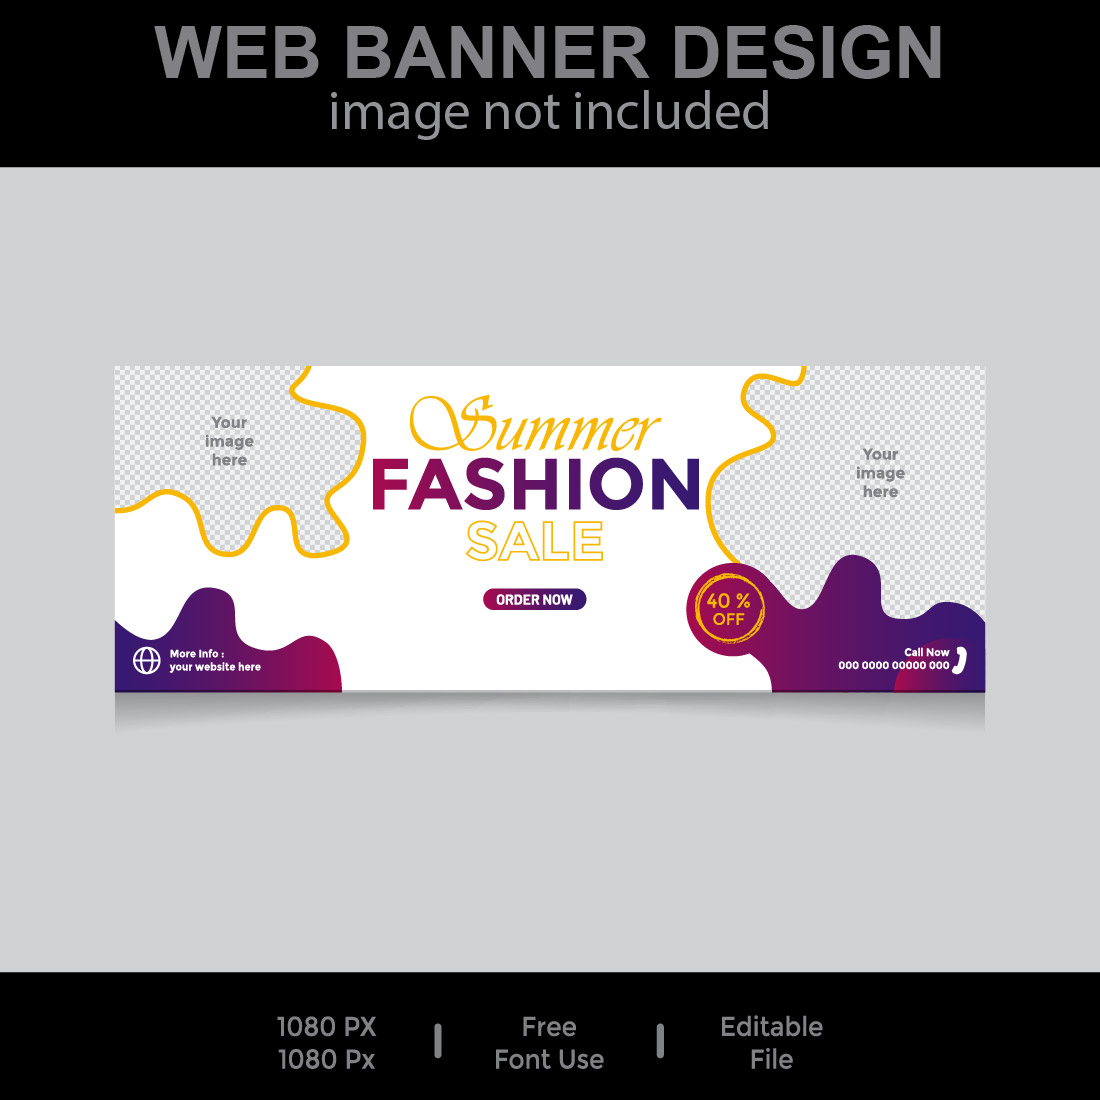 Web Banner Design preview image.